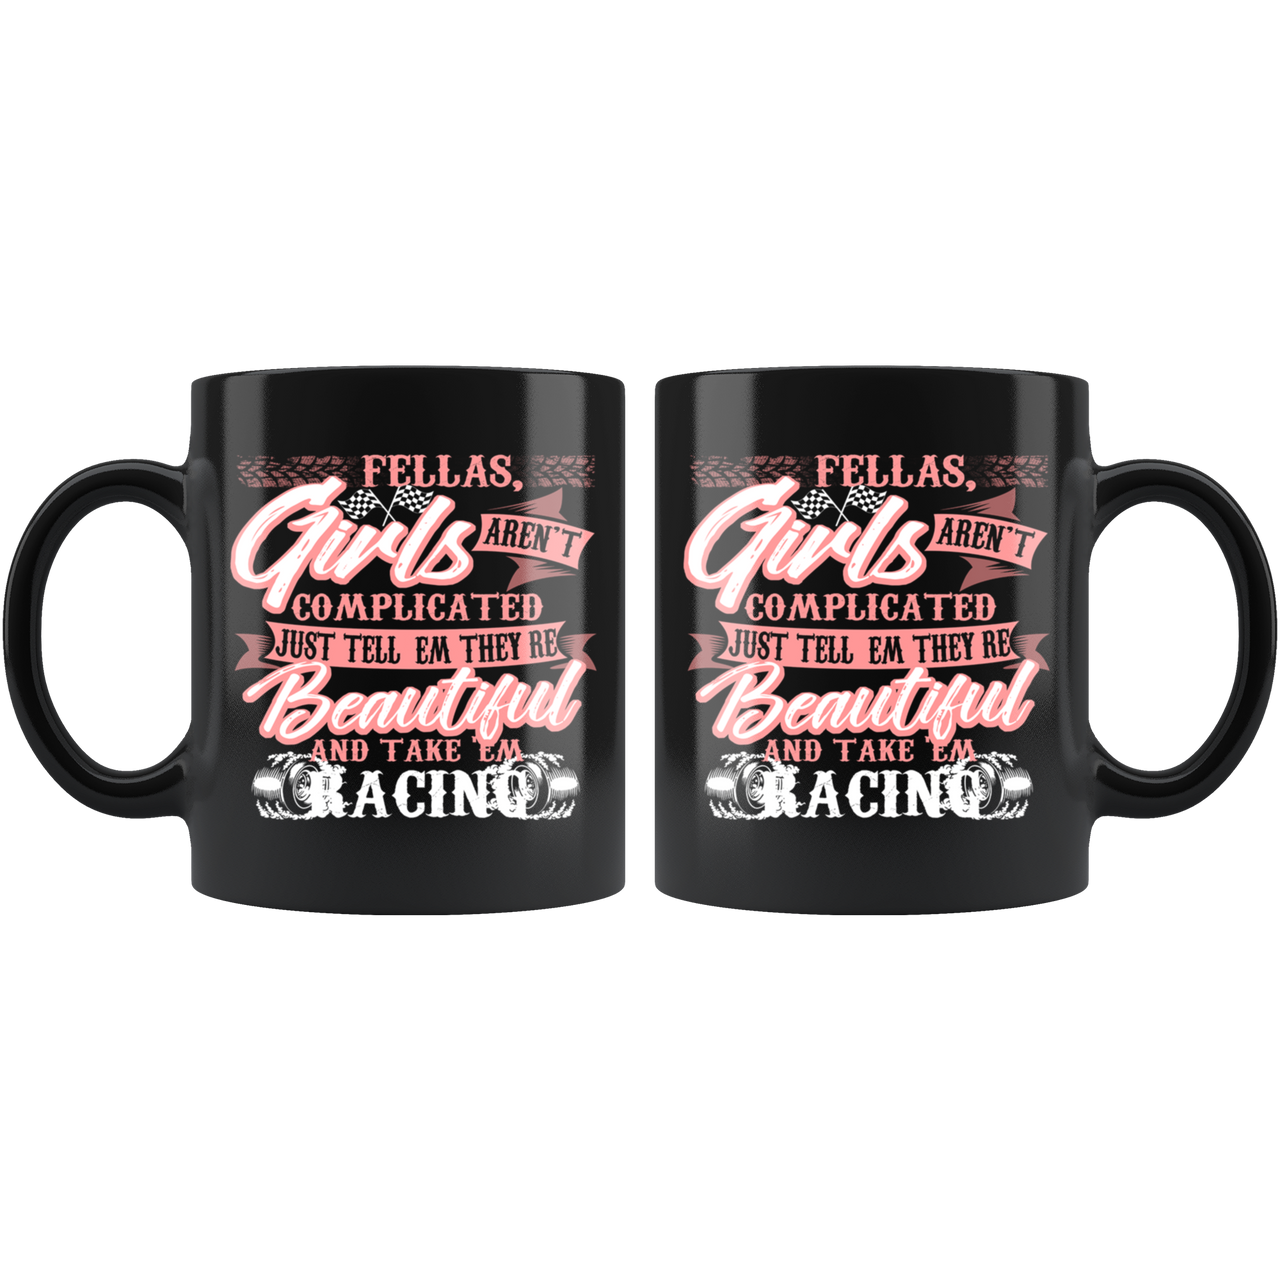 Fellas Girls Aren't Complicated Just Tell Them They're Beautiful And Take Them Racing Mug!